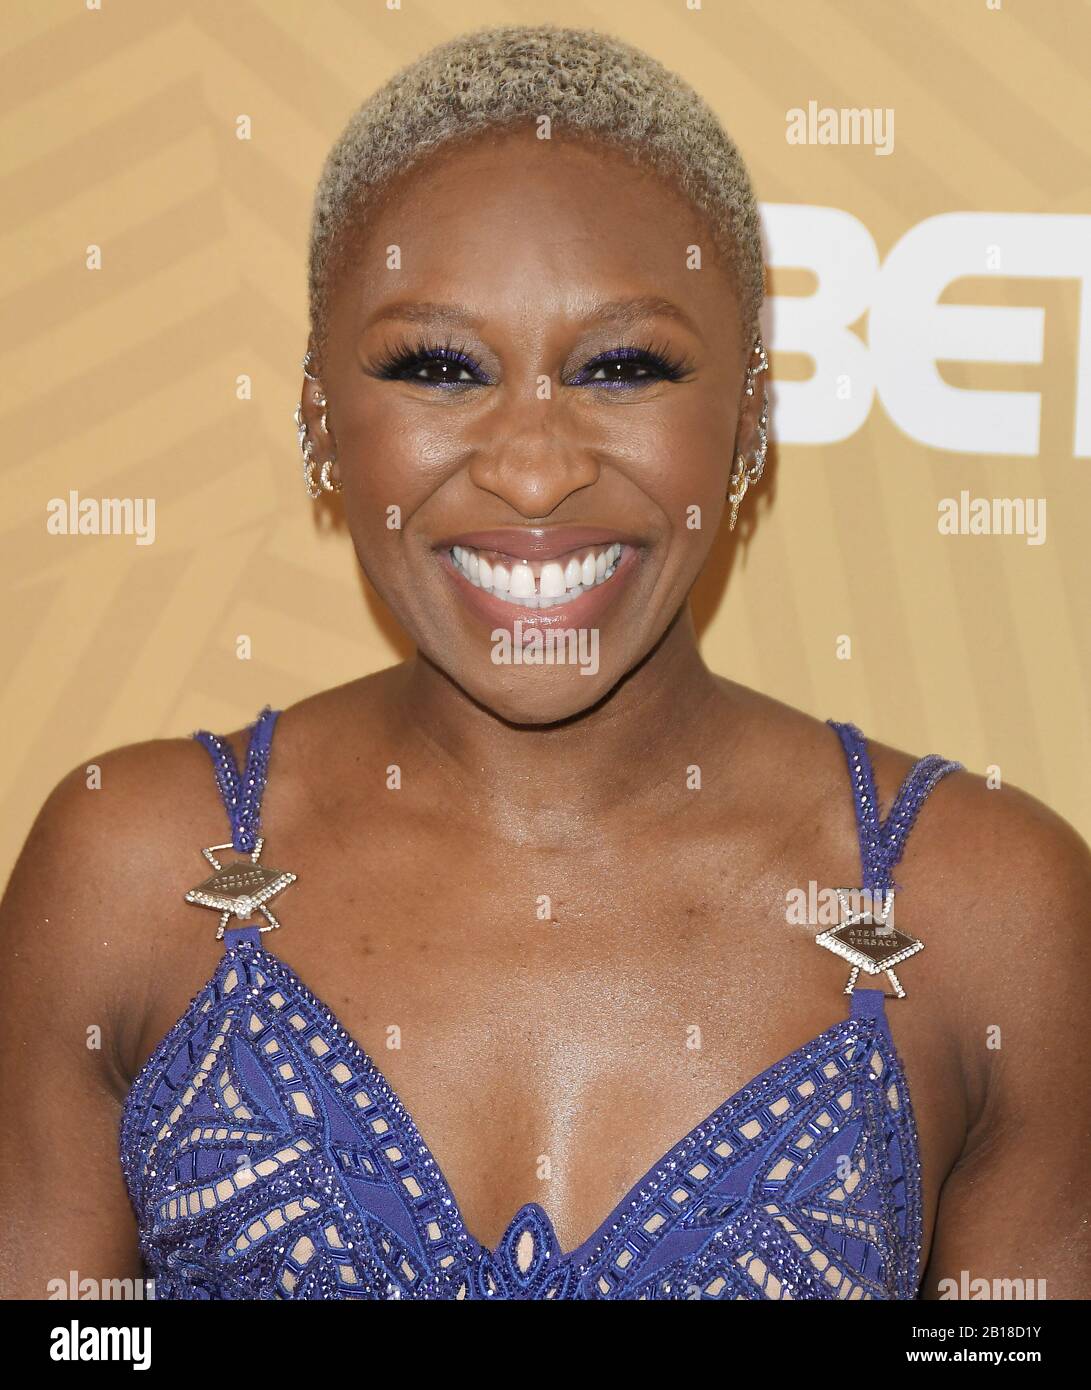 Cynthia Erivo arrives at the American Black Film Festival Honors Awards Ceremony held at the Beverly Hilton in Beverly Hills, CA on Sunday, ?February 23, 2020.  (Photo By Sthanlee B. Mirador/Sipa USA) Stock Photo